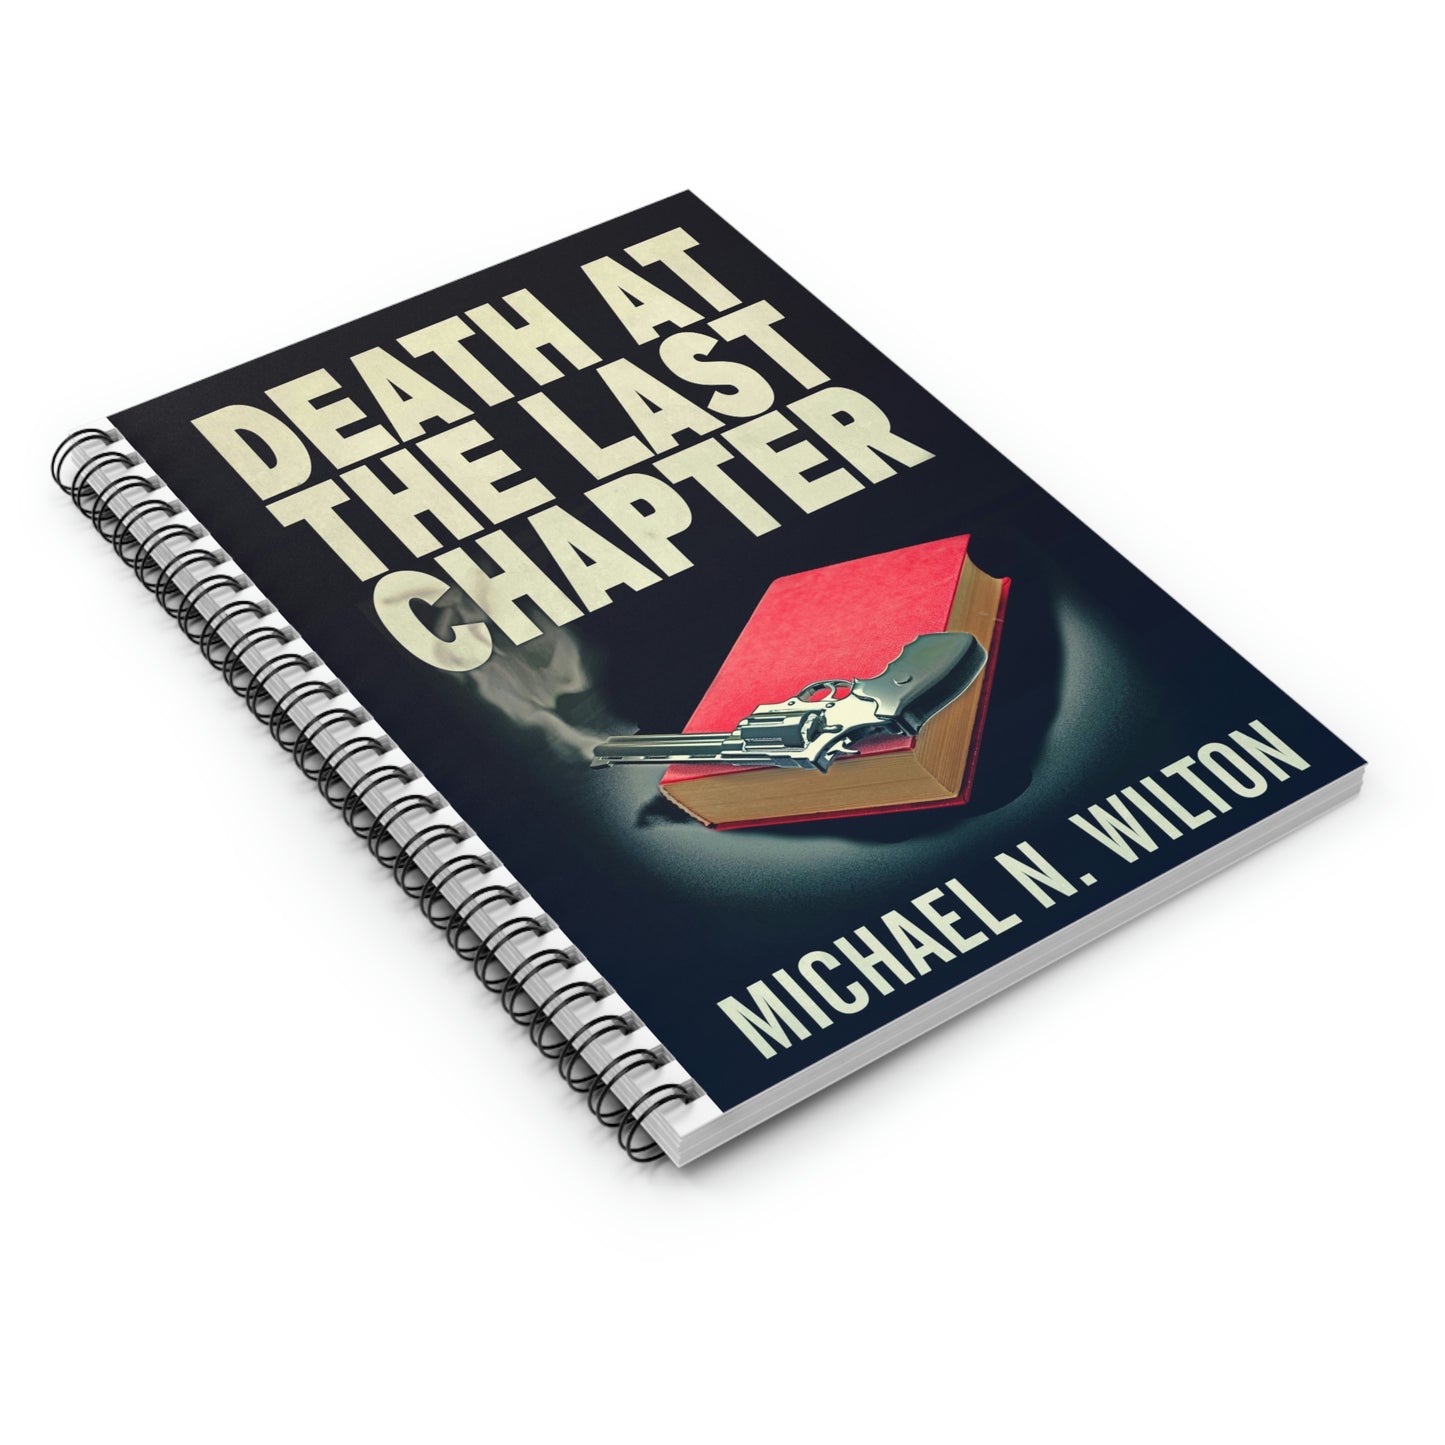 Death At The Last Chapter - Spiral Notebook